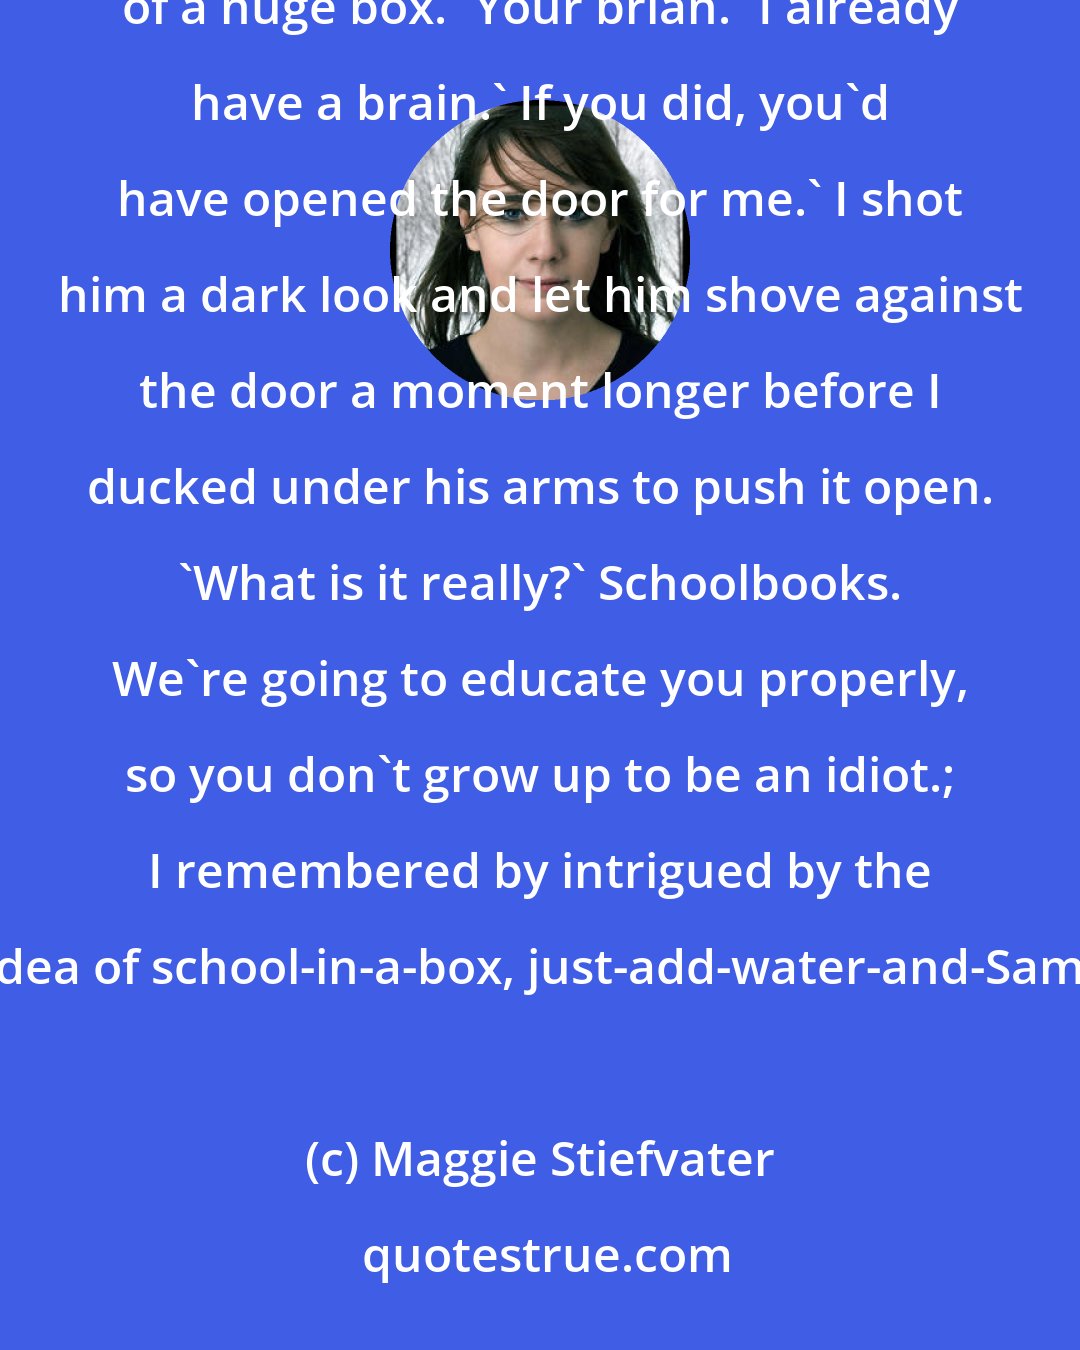 Maggie Stiefvater: What's that?' Beck shoved his back ineffectually against the glass door, suffering under the weight of a huge box. 'Your brian.' I already have a brain.' If you did, you'd have opened the door for me.' I shot him a dark look and let him shove against the door a moment longer before I ducked under his arms to push it open. 'What is it really?' Schoolbooks. We're going to educate you properly, so you don't grow up to be an idiot.; I remembered by intrigued by the idea of school-in-a-box, just-add-water-and-Sam.